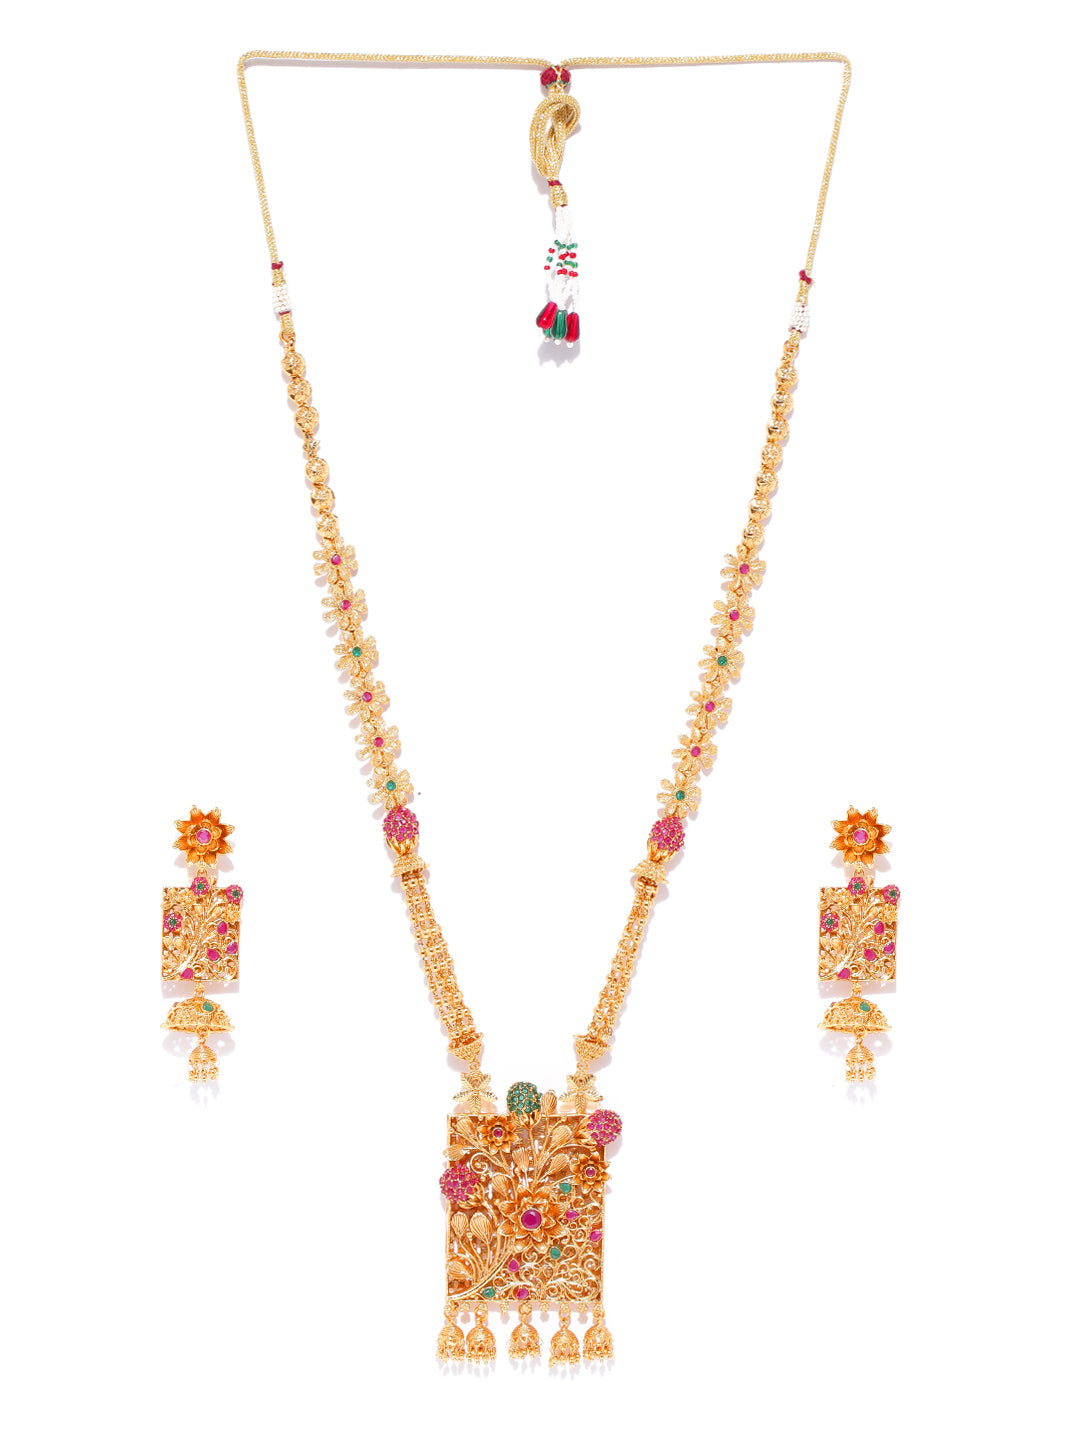 Priyaasi Gold-Plated Long Jewellery Set in Floral Pattern